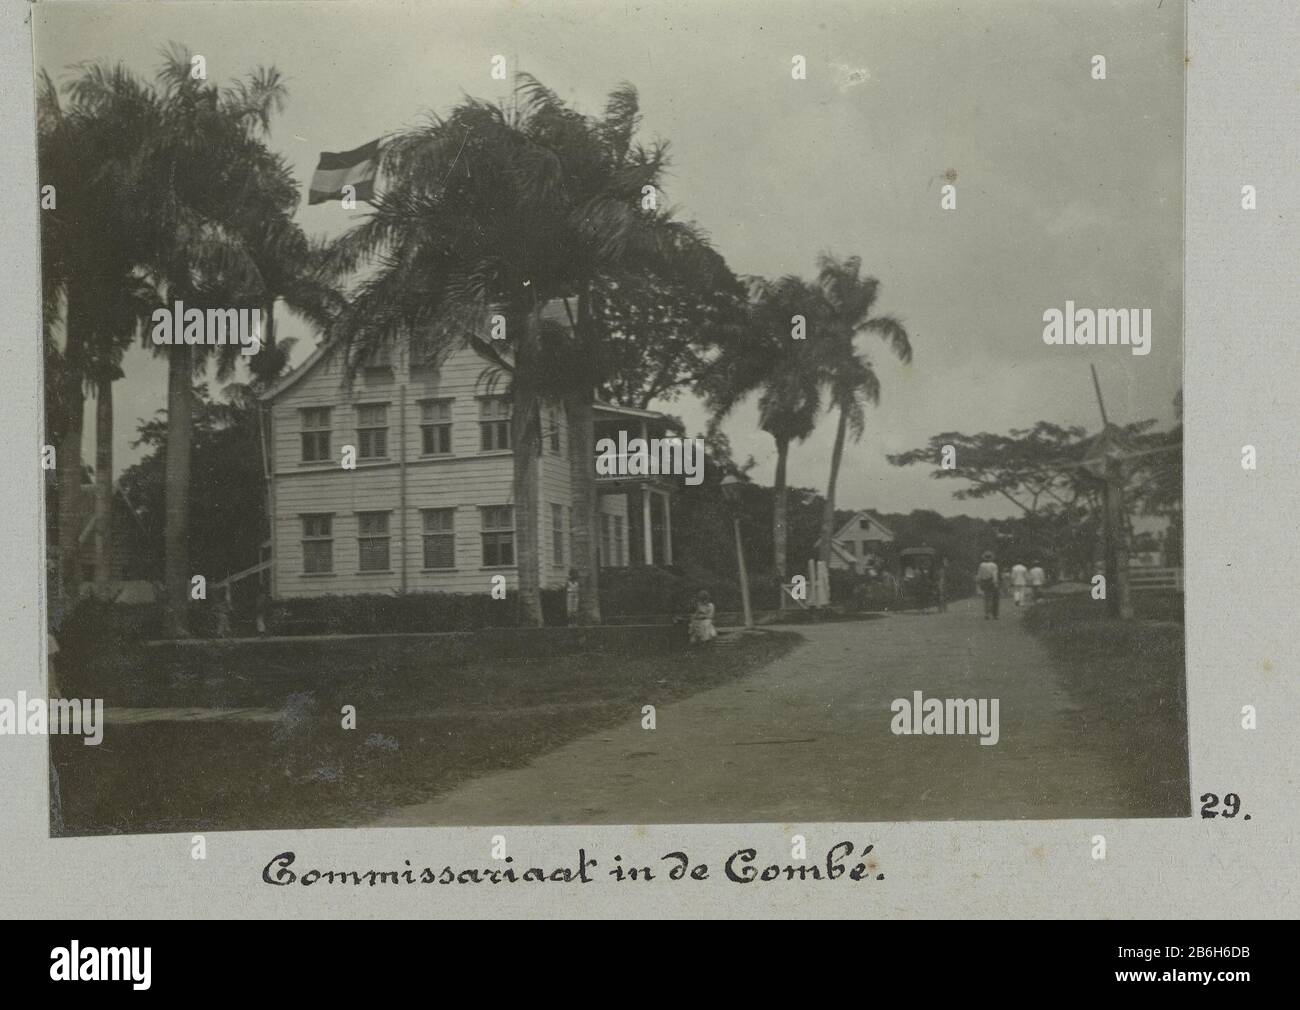 Building commissioner in Combé in Paramaribo. Part of the album Souvenir de Voyage (Part 1), about the life of the Doijer family in and around the plantation Ma Retraite in Suriname during the years 1906-1913. Manufacturer : Photographer: Hendrik Doijer (attributed to) Place manufacture: Suriname Date: 1906 - 1913 Physical features: gelatin silver print material: paper Technique: gelatin silver print dimensions: photo: h 80 mm × W 110 mm Date: 1906 - 1913 Stock Photo